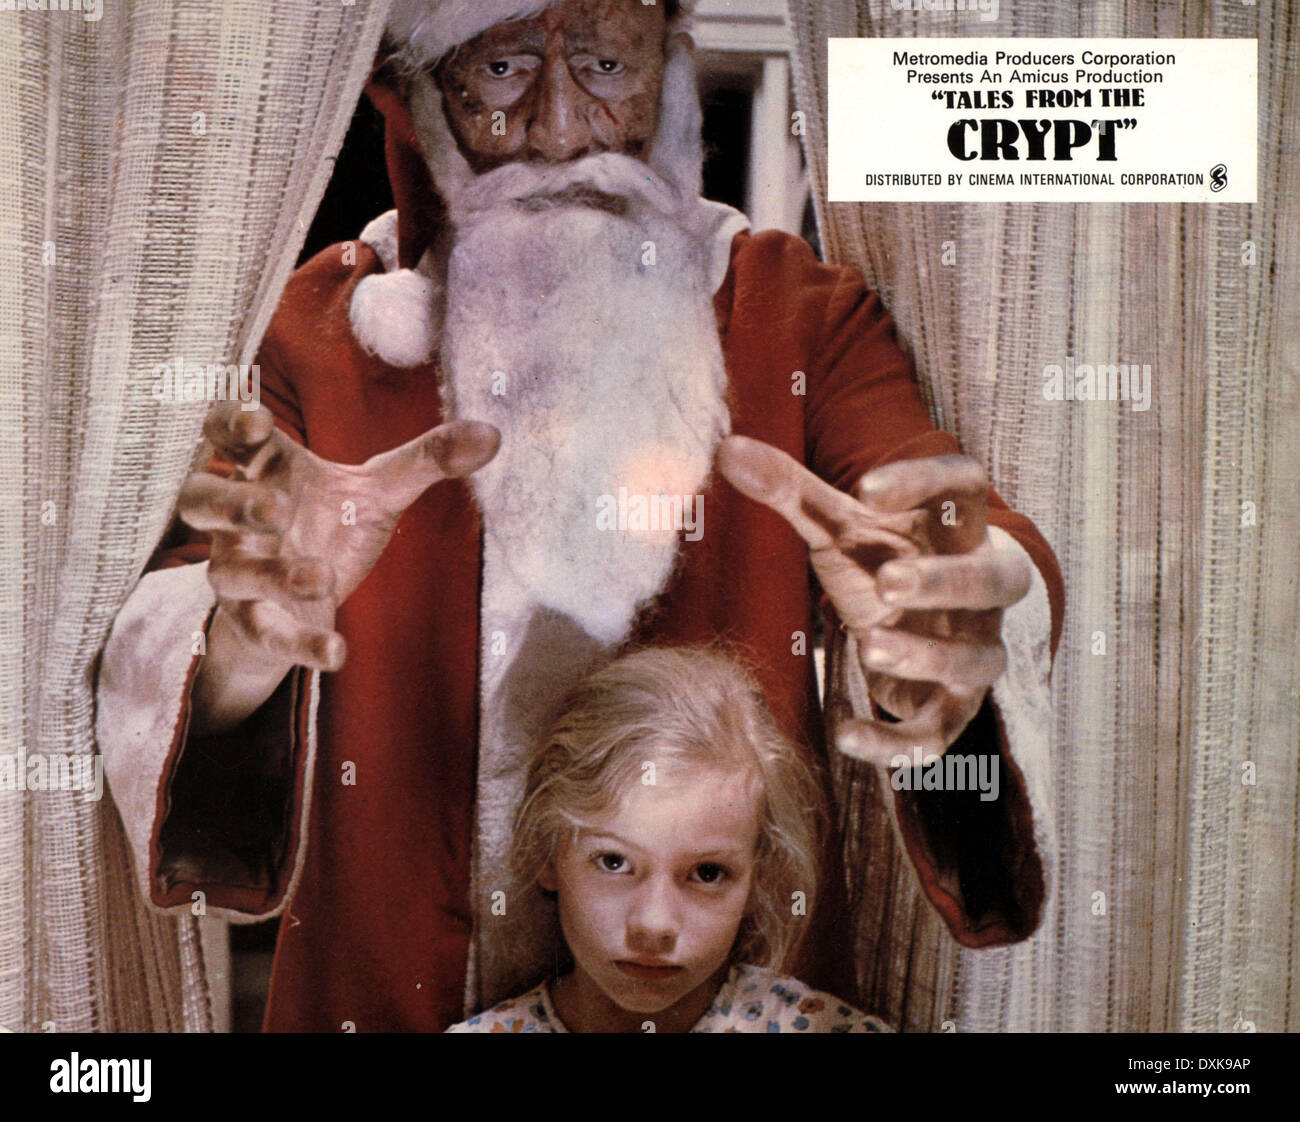 TALES FROM THE CRYPT (US/UK 1972) AMICUS PRODUCTIONS/METROME Stock Photo